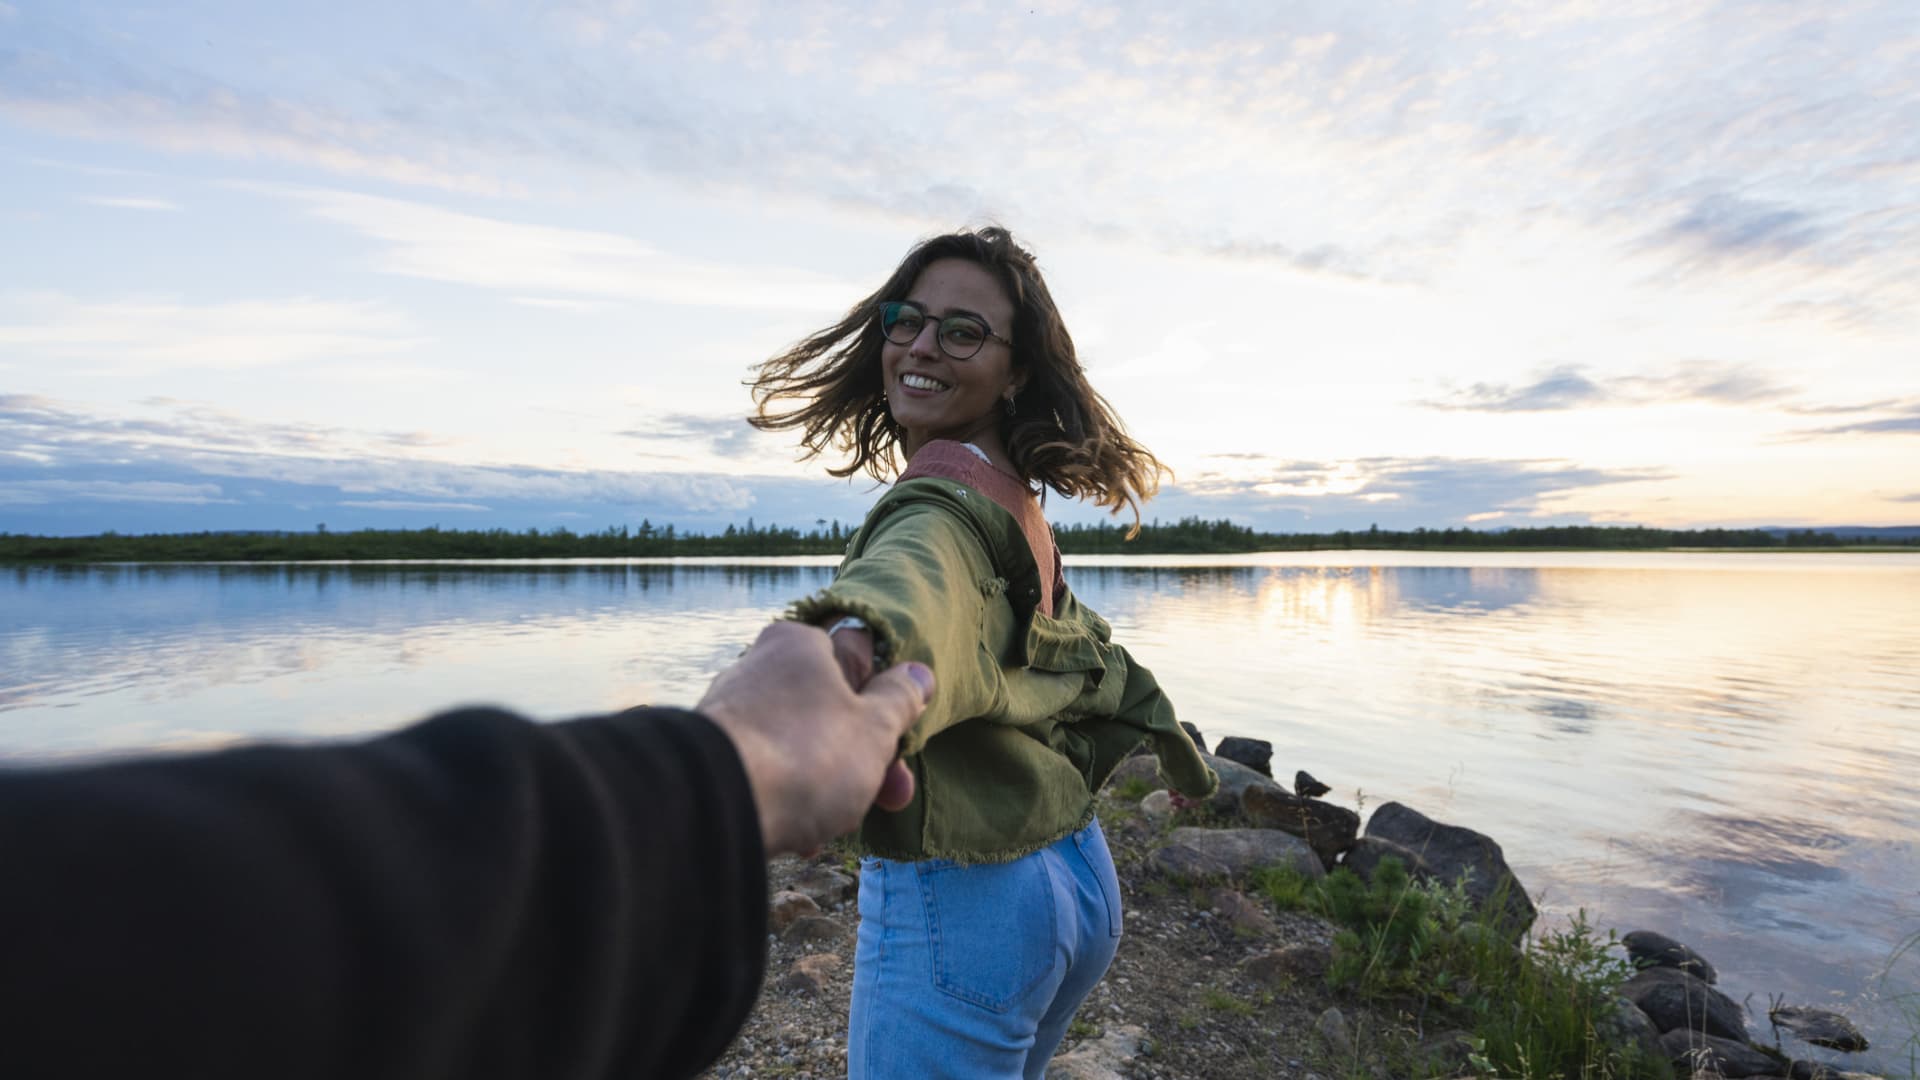 I took Finland’s free masterclass on happiness: Listed below are 3 things I learned